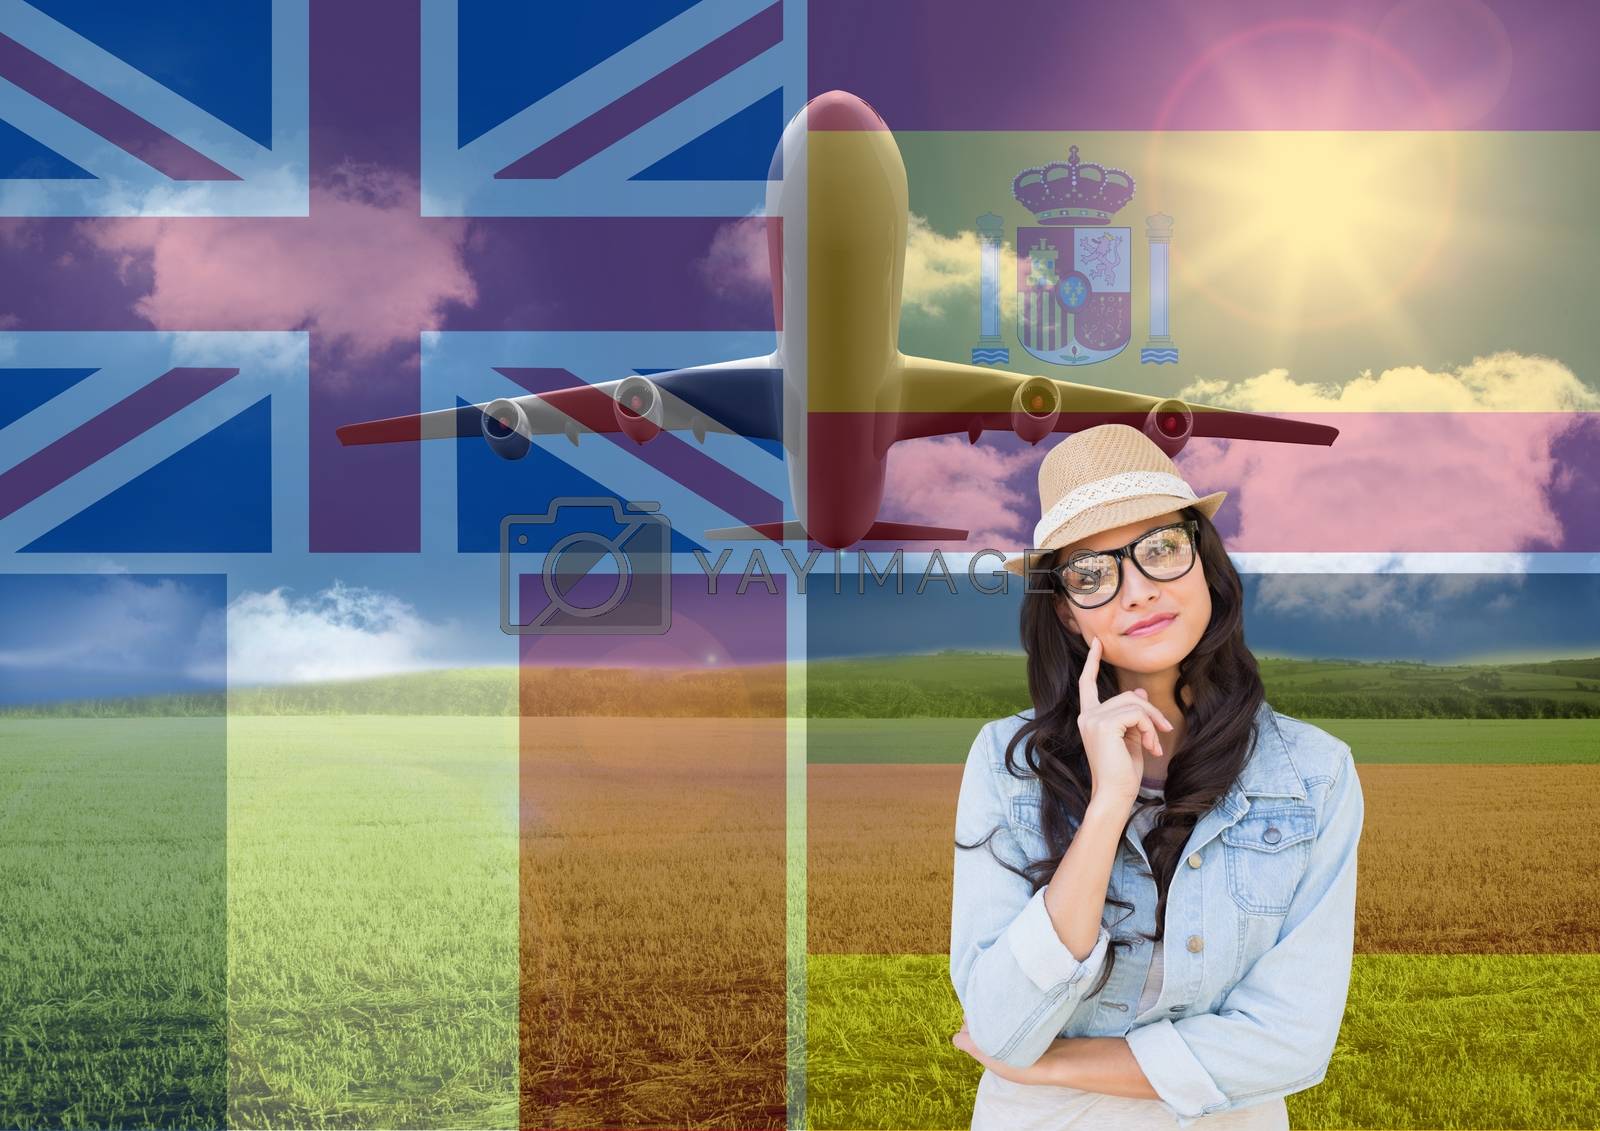 Royalty free image of main language flags overlap with plane around young woman with hat thinking by Wavebreakmedia